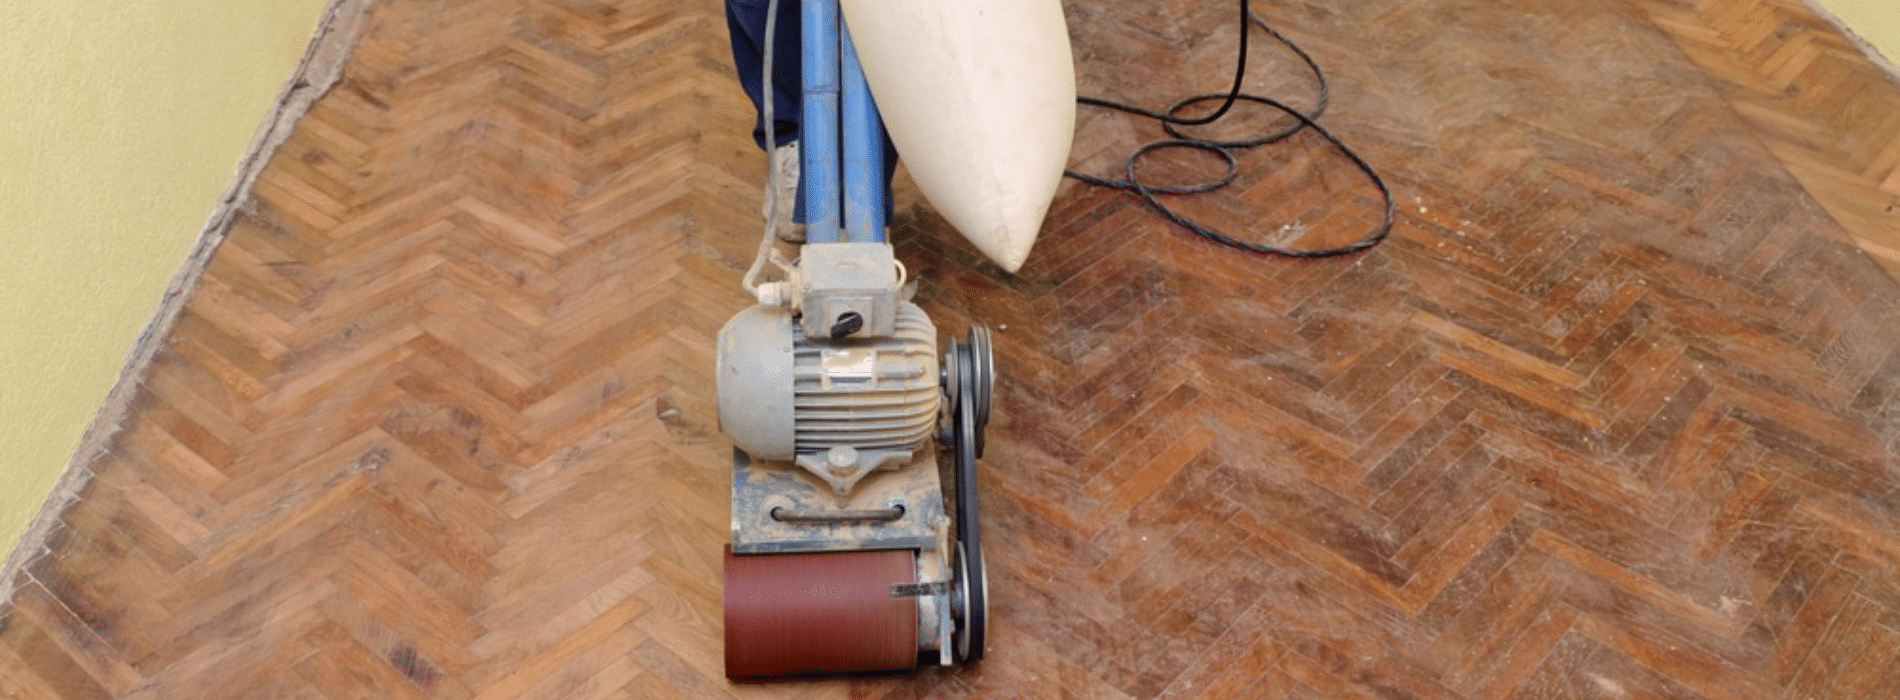 Expert floor sanding by Mr Sander® in Hendon. Witness the meticulous restoration of a herringbone floor using a powerful 1900W Dimension belt sander. The dust extraction system ensures a clean and efficient process, resulting in stunning, revitalized floors.